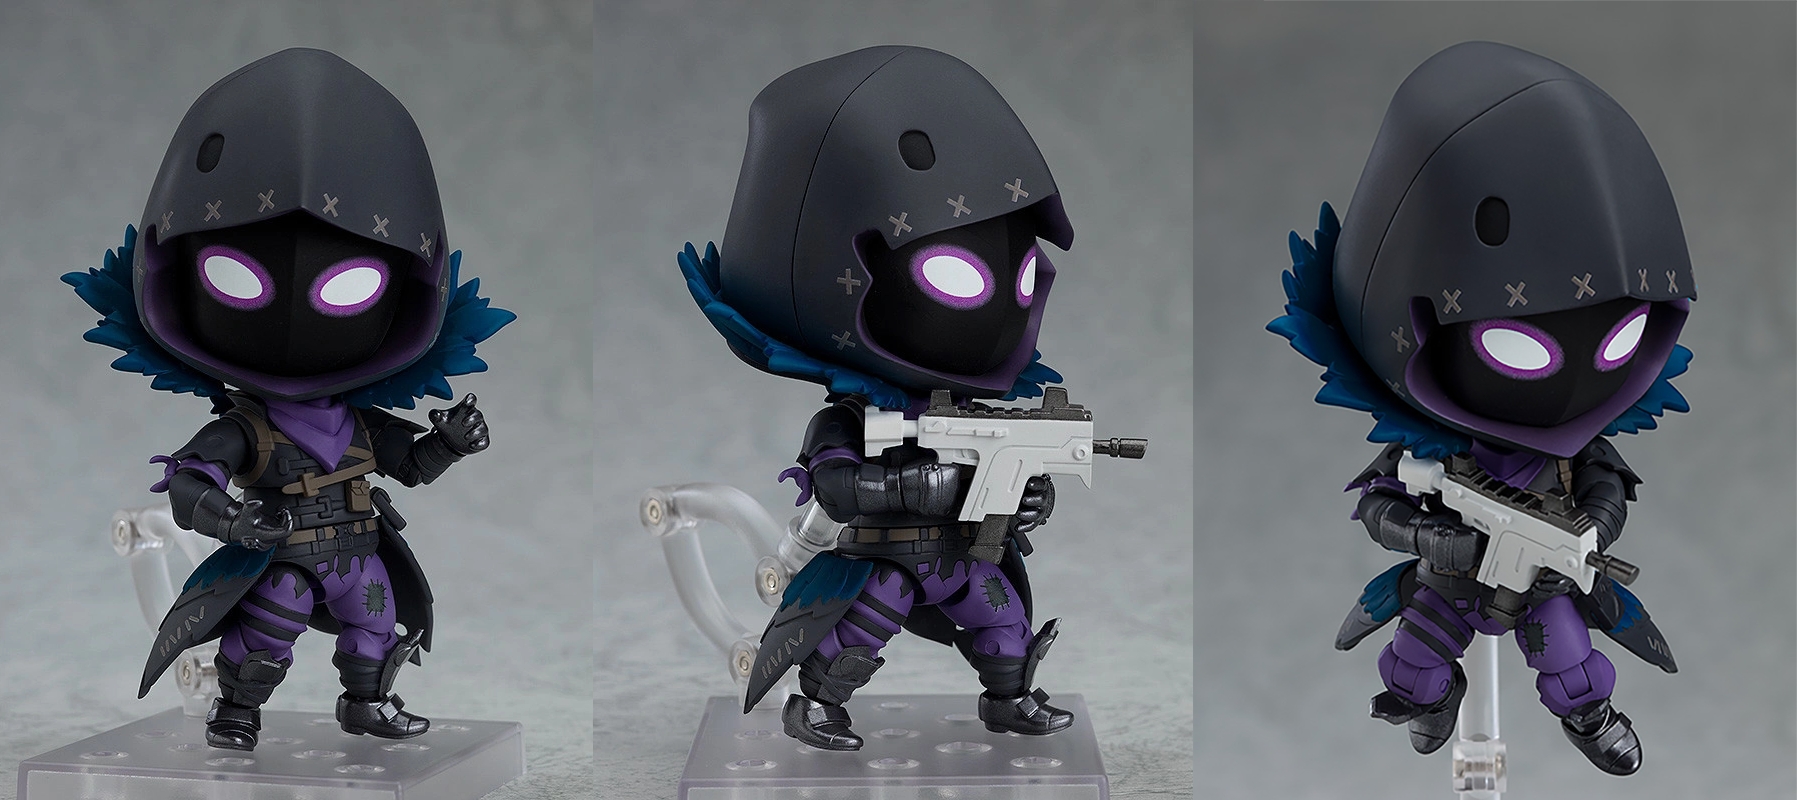 Raven Outfit From Fortnite Is The Latest To Join Good Smile Company’s Nendoroid Line